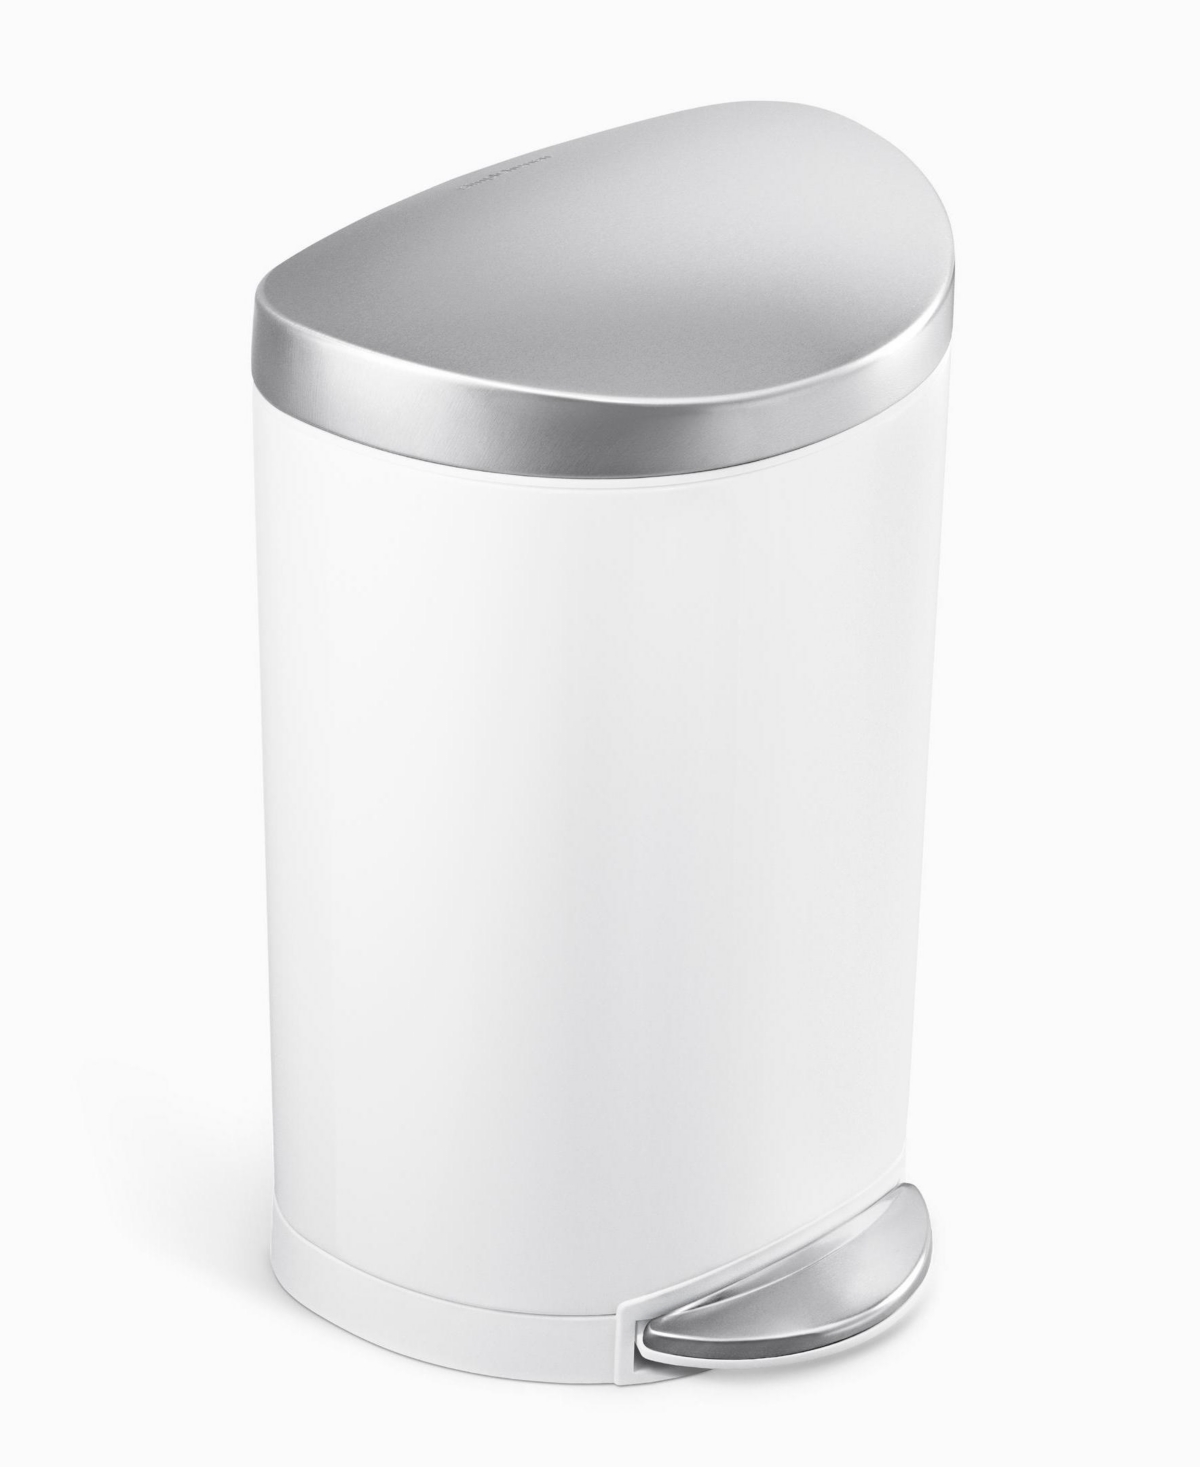 10 Litre Steel Semi-Round Step Can - White Stainless Steel